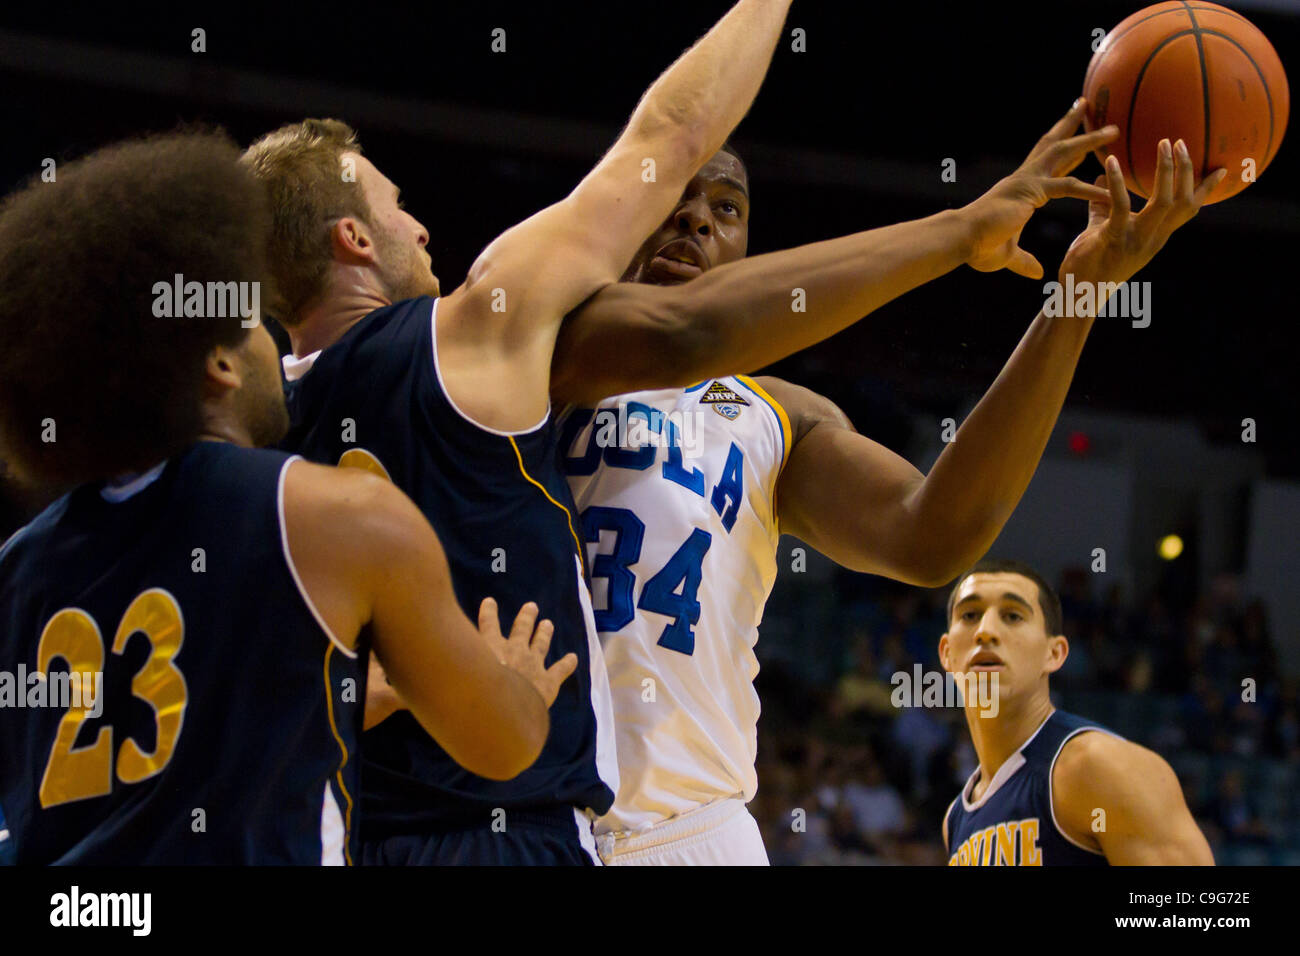 Dec. 20, 2011 - Los Angeles, California, U.S - UCLA Bruins Joshua Smith (34) gets fouled while driving to the basket in first half action.  The UCLA Bruins defeat the UC Irvine Anteaters 89-60. (Credit Image: © Josh Chapel/Southcreek/ZUMAPRESS.com) Stock Photo